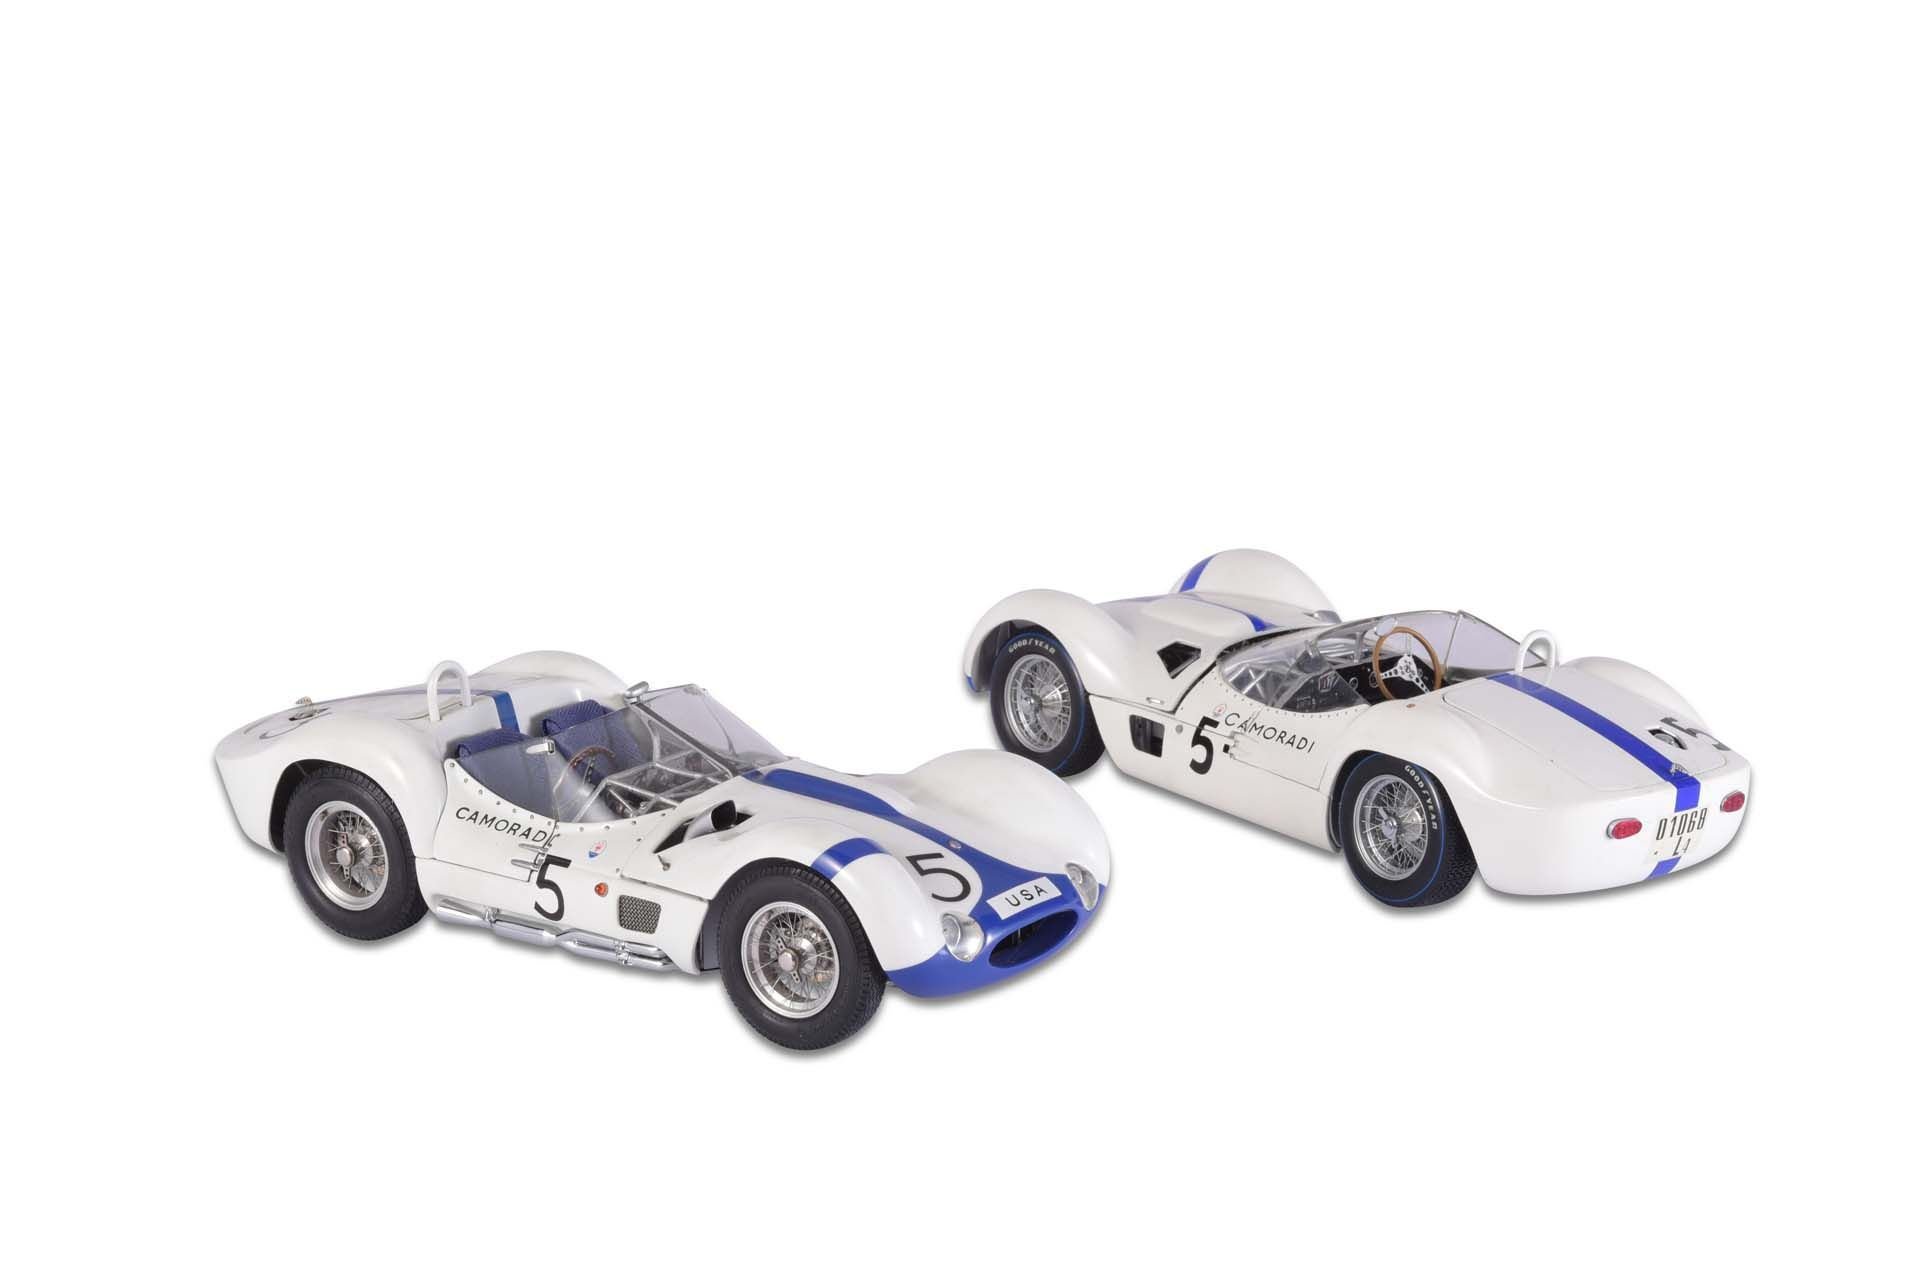 For Sale Pair of 1960 Maserati Tipo 61 Birdcage Cars